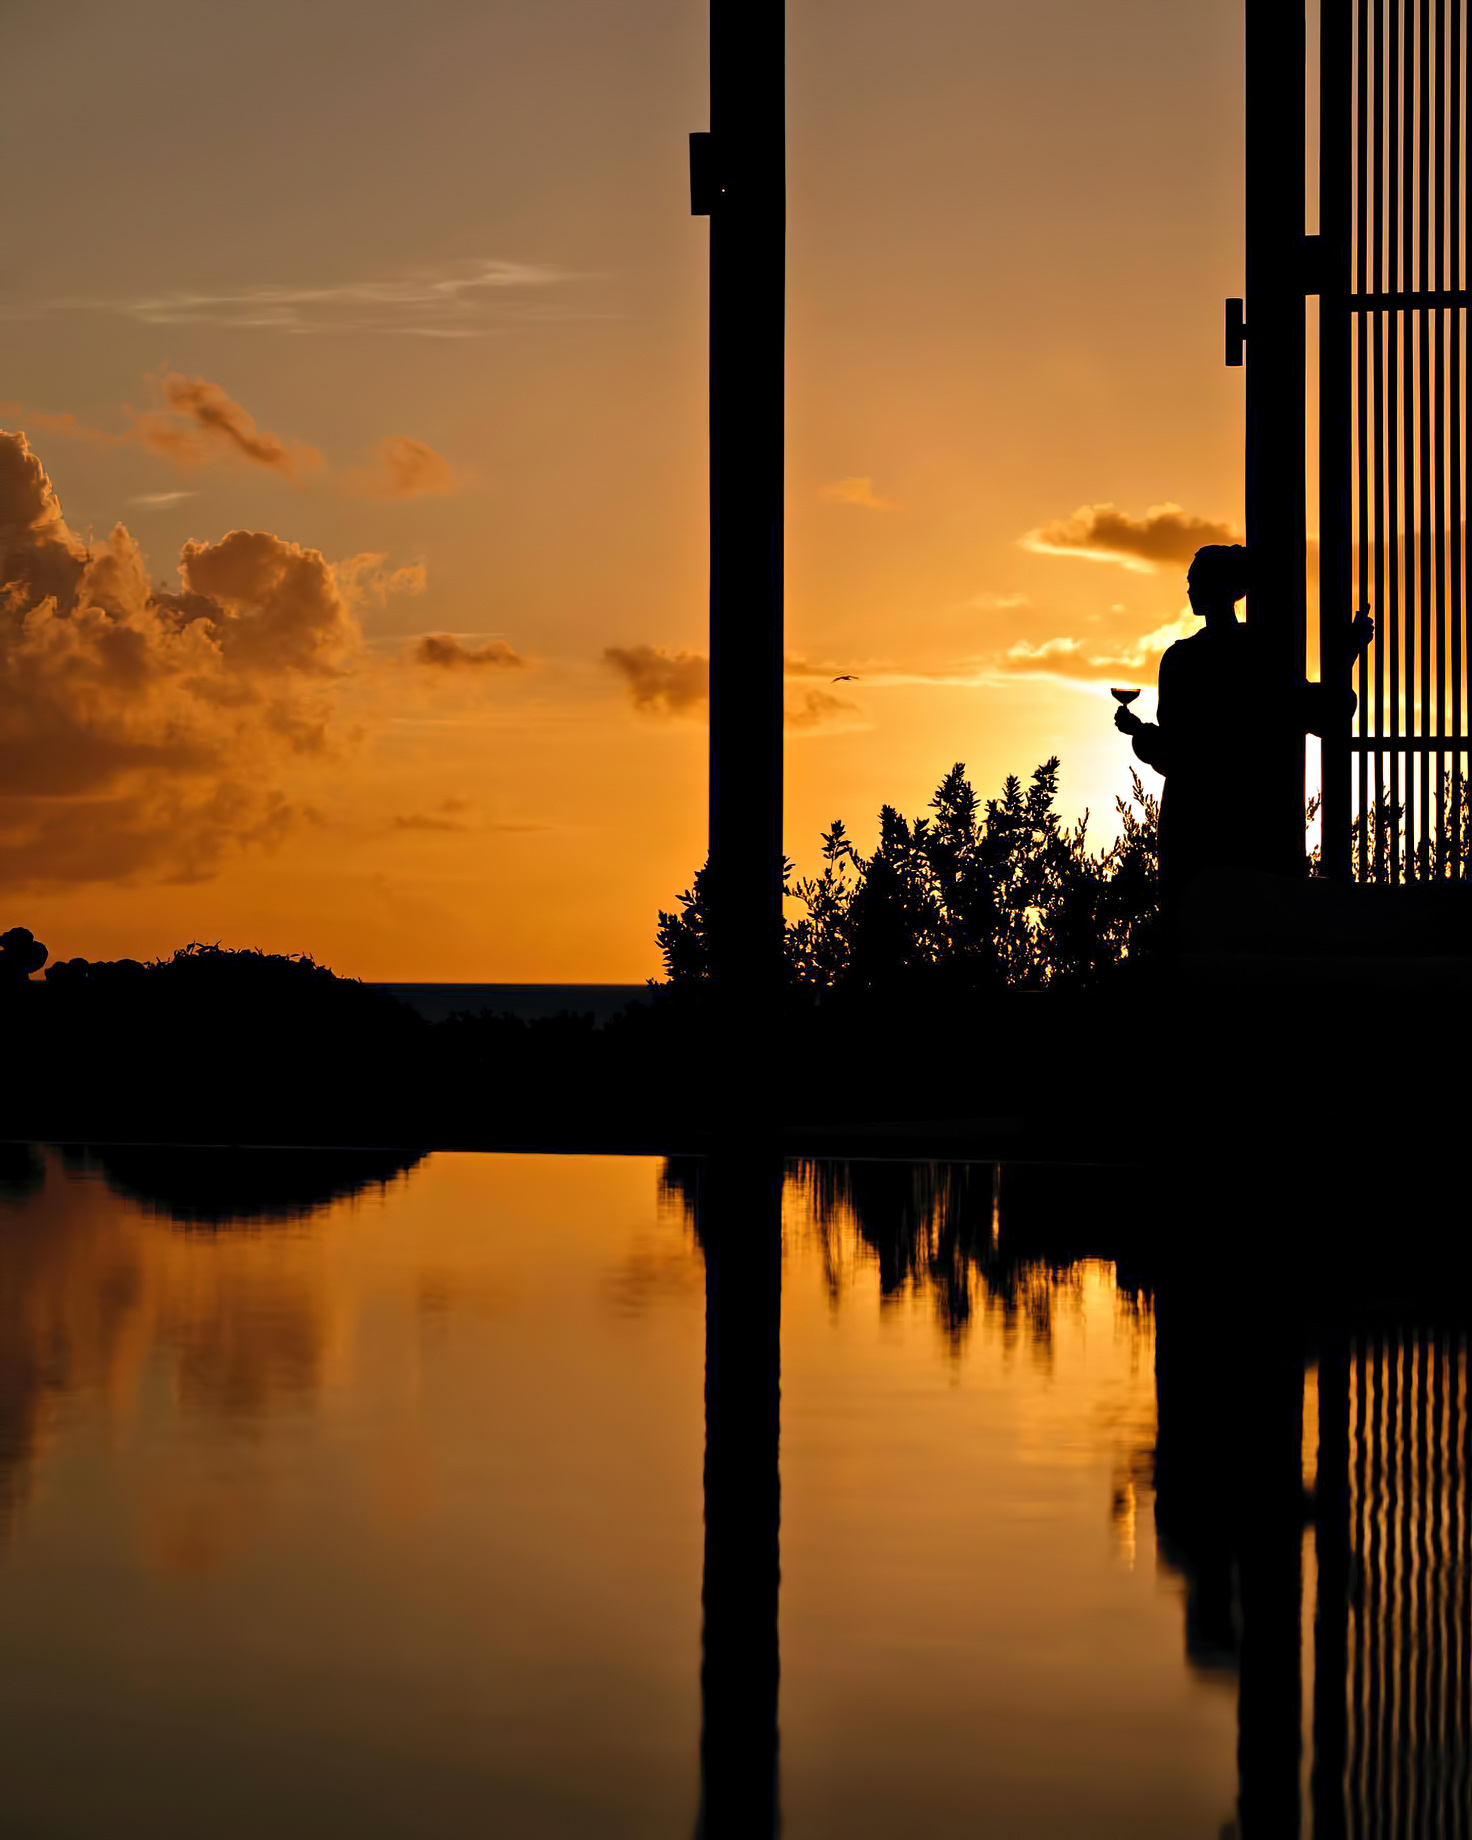 Amanyara Resort - Providenciales, Turks and Caicos Islands - Sunset Relaxation